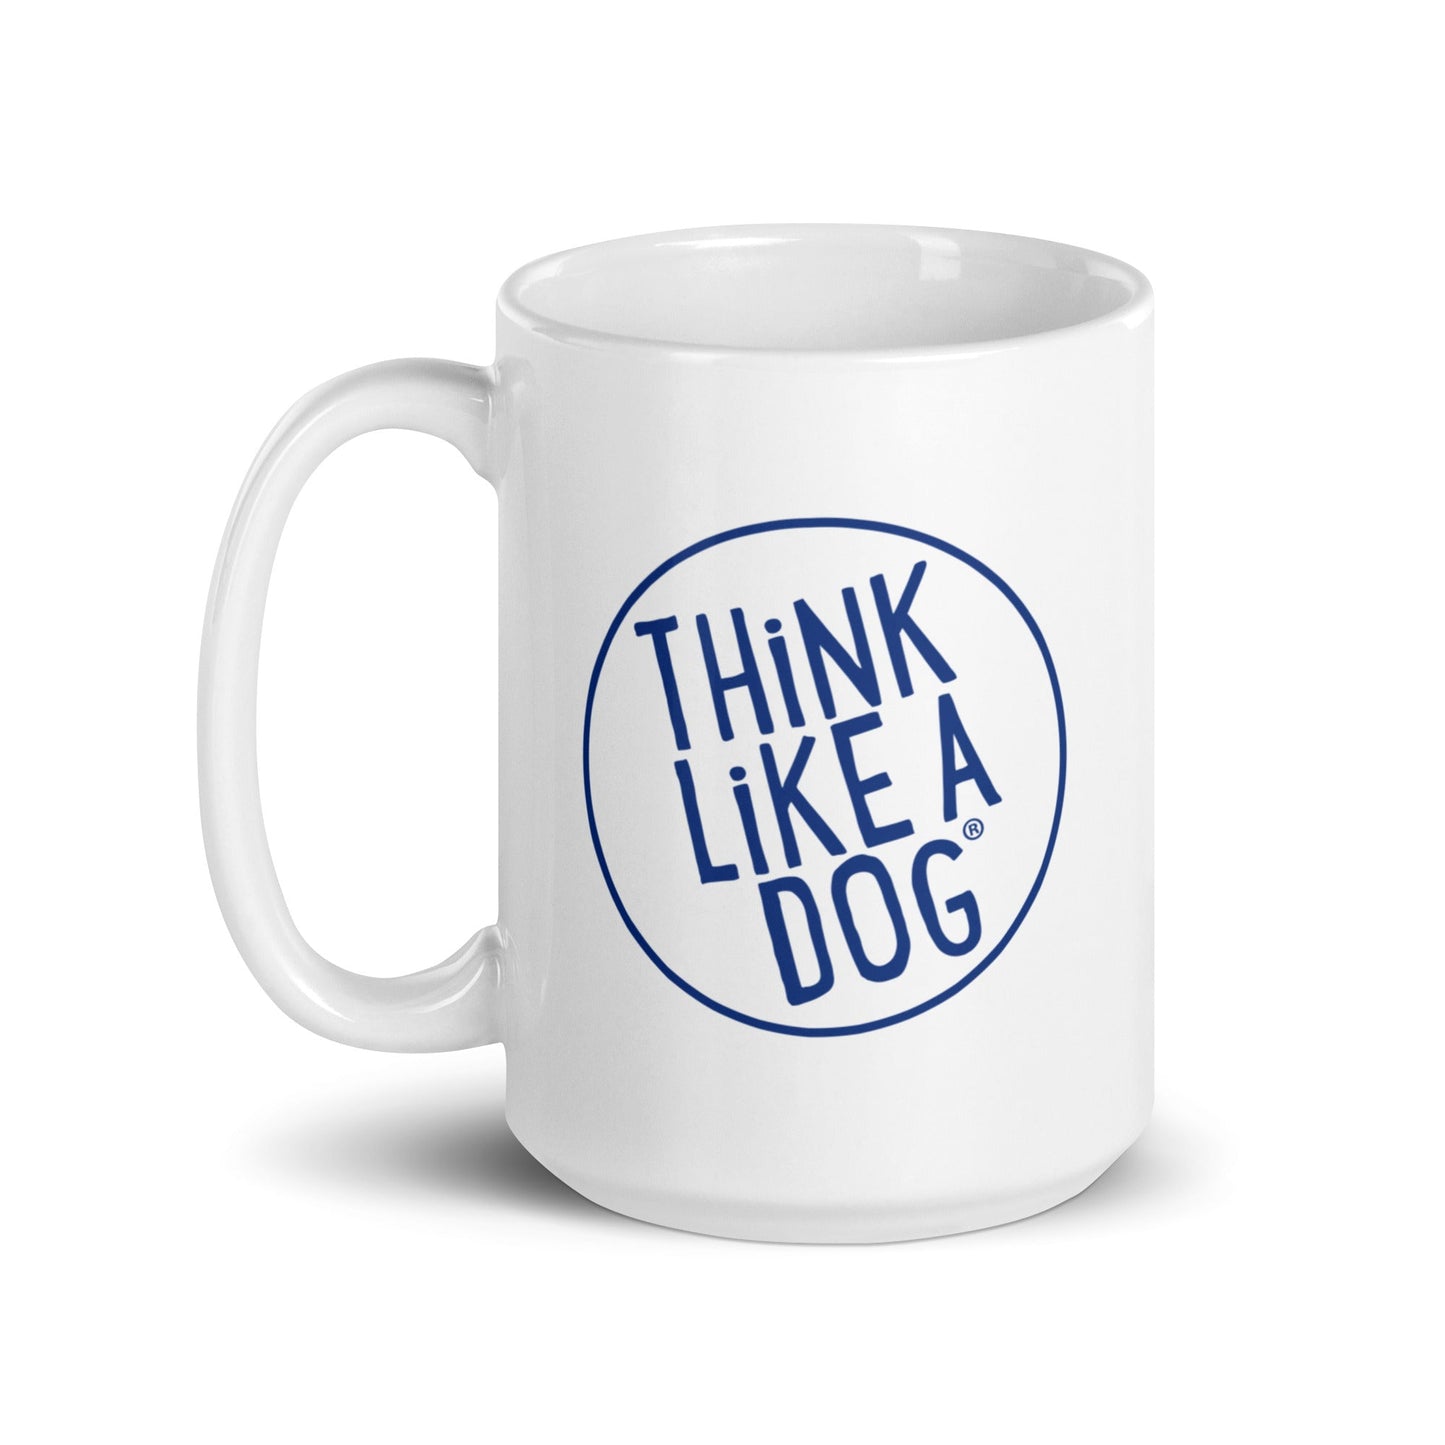 White glossy mug with the THiNK LiKE A DOG® brand logo printed in blue text.